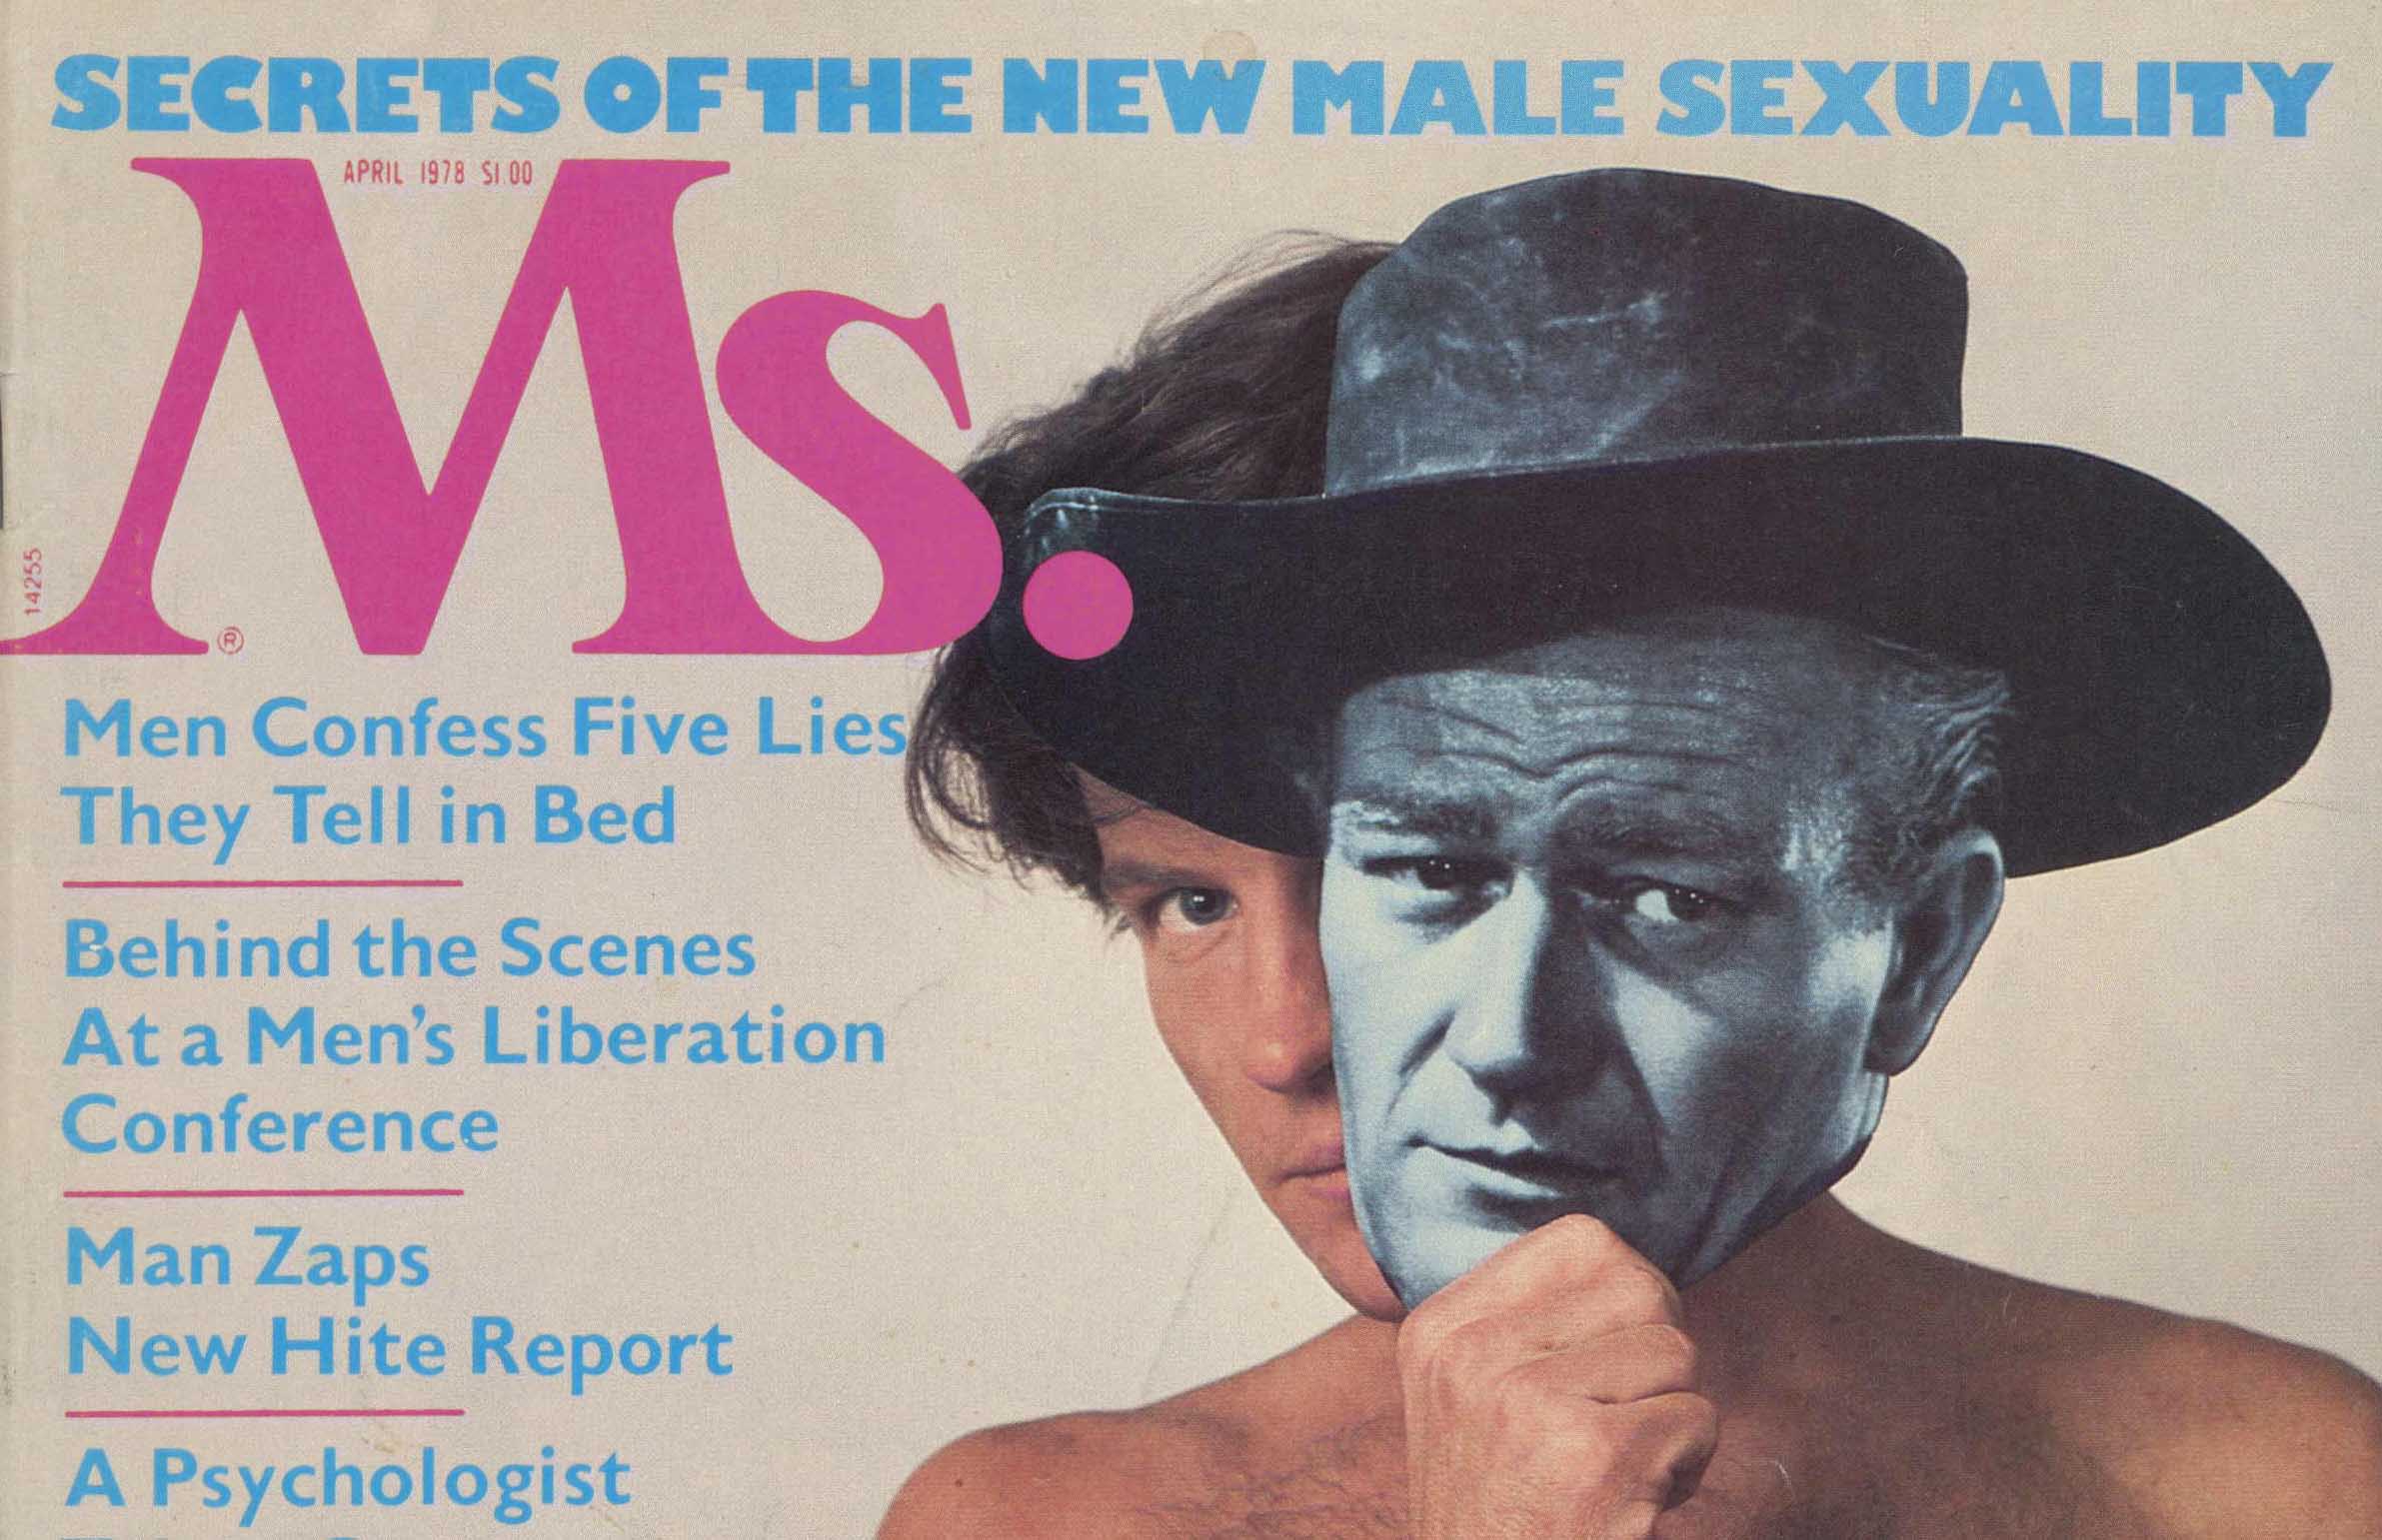 Ms. Secrets of the new male sexuality, Anti-Sexism Publications, 1978-1980, © Michigan State University Libraries